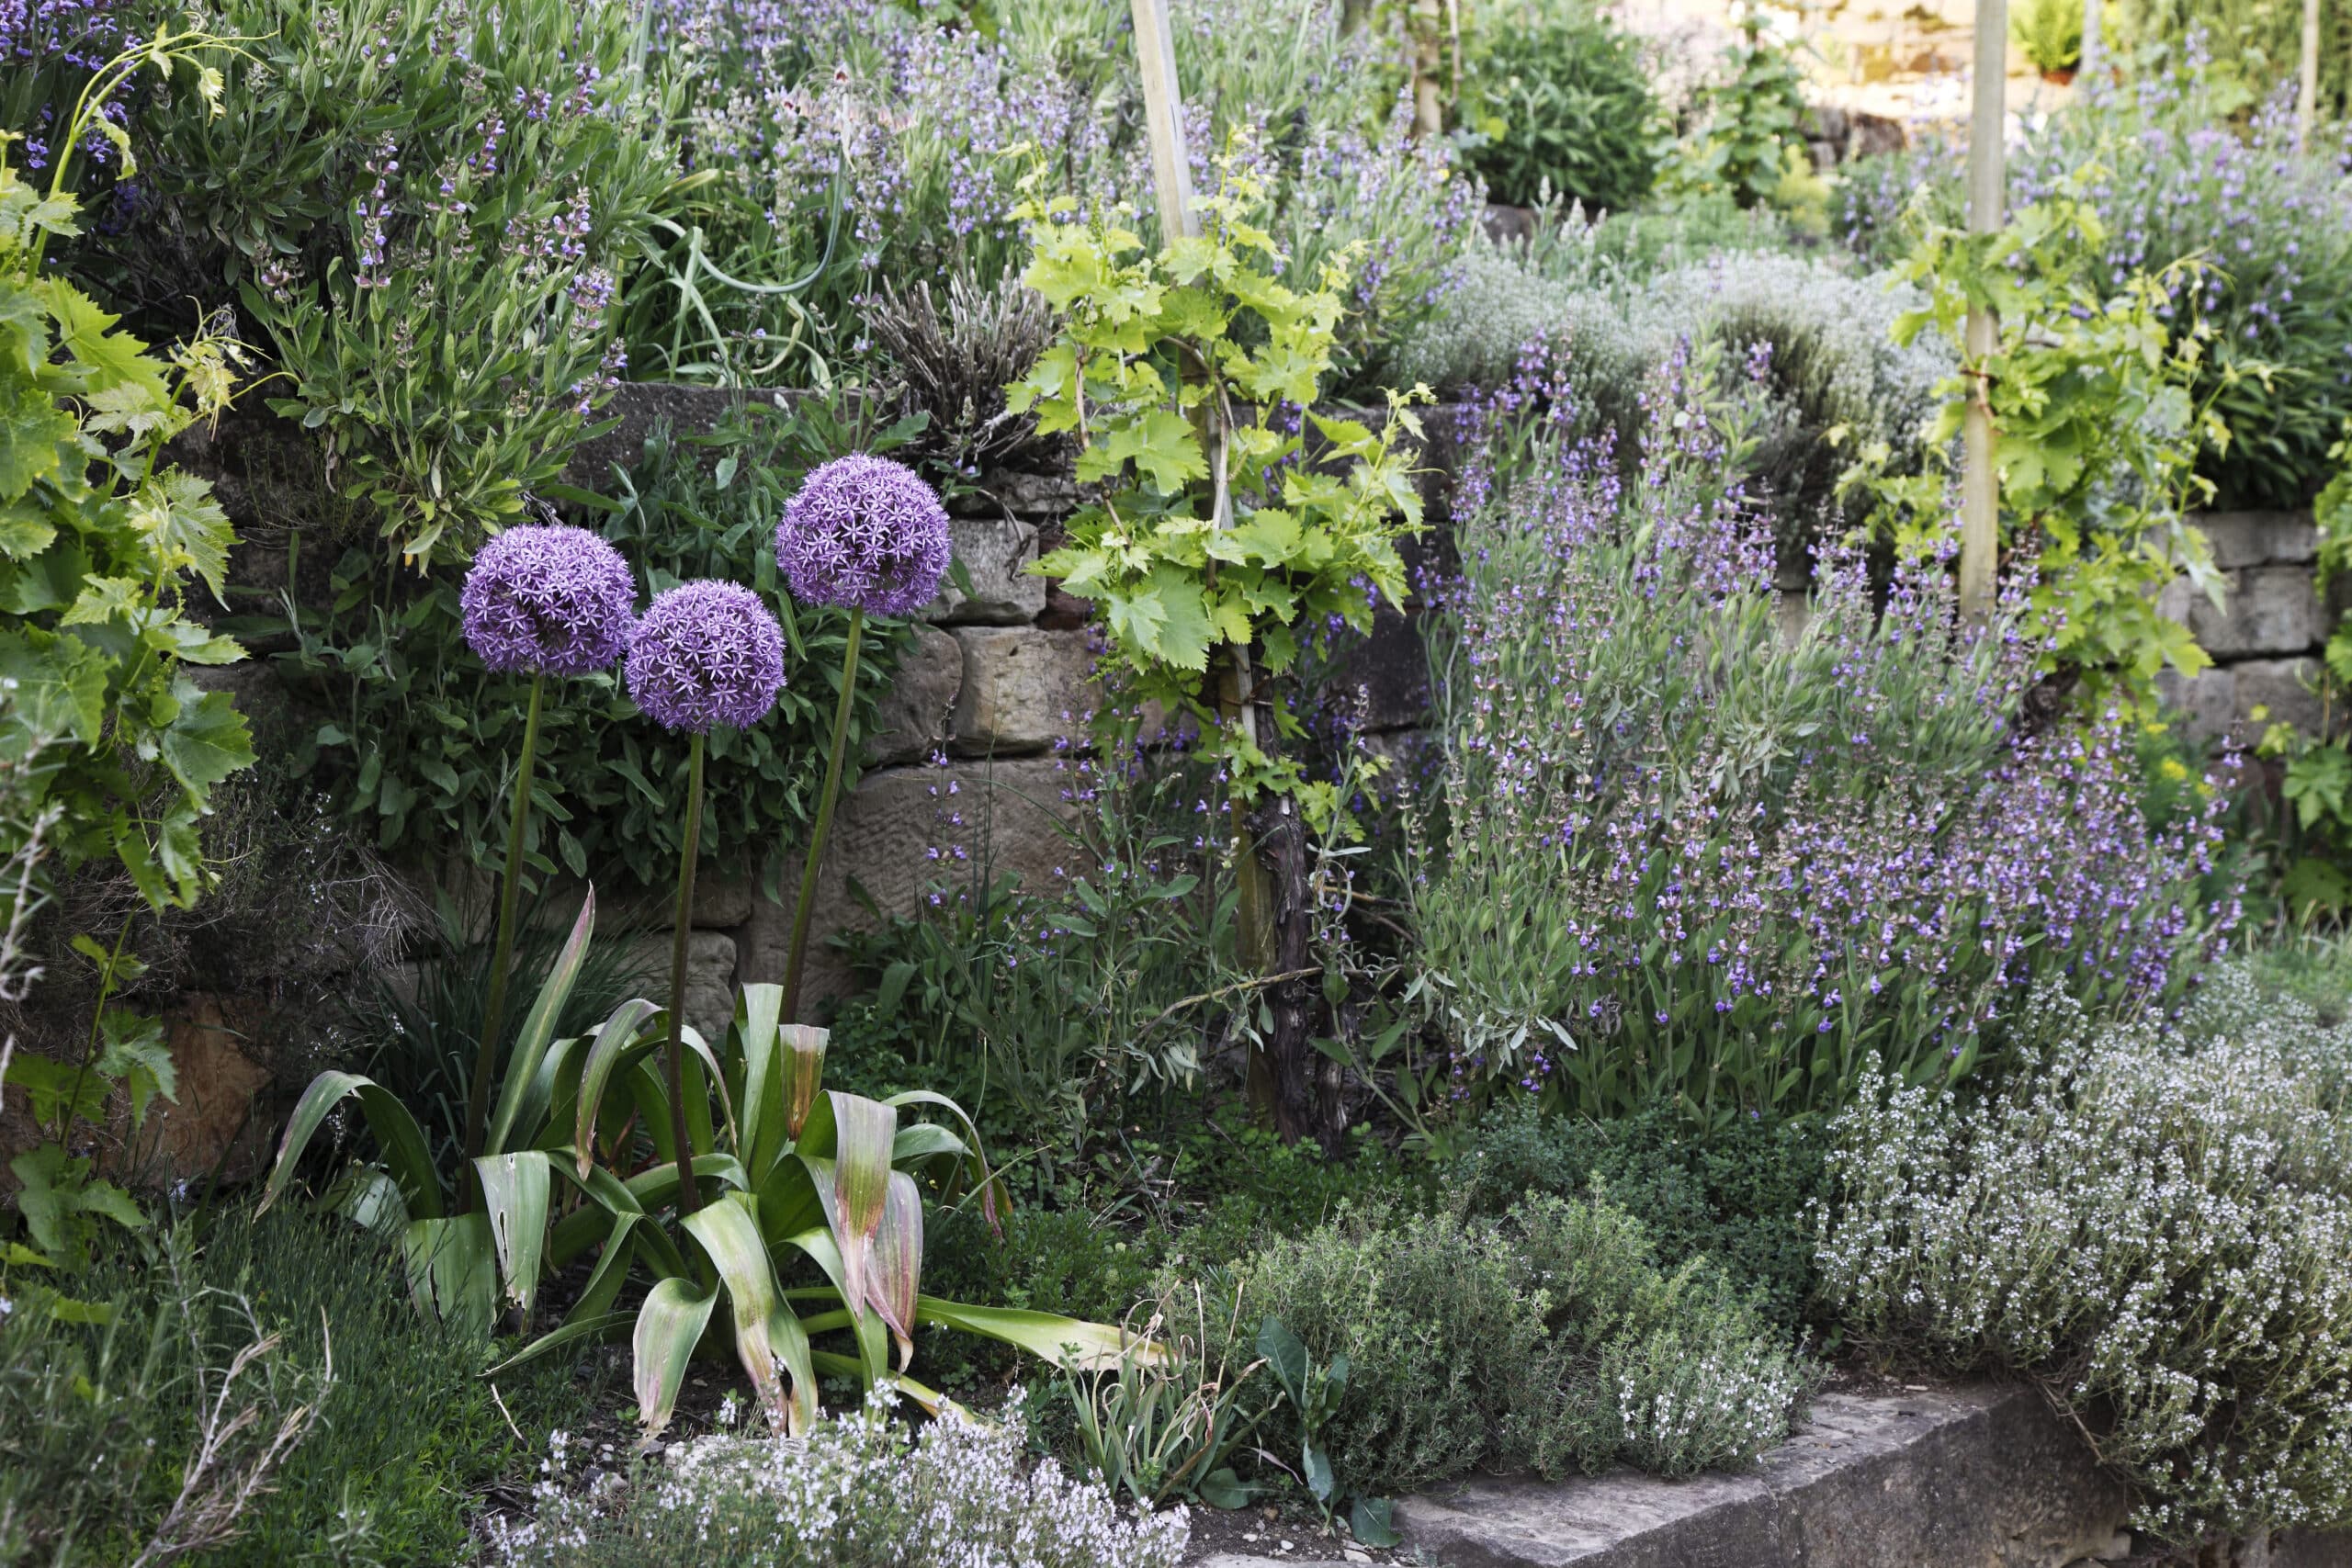 Allium 'Globemaster' ( Onion ) bloom from June to July, before wall with sage ( Salvia ) and thyme ( Thymus ), Vitis vinifera ( wine )